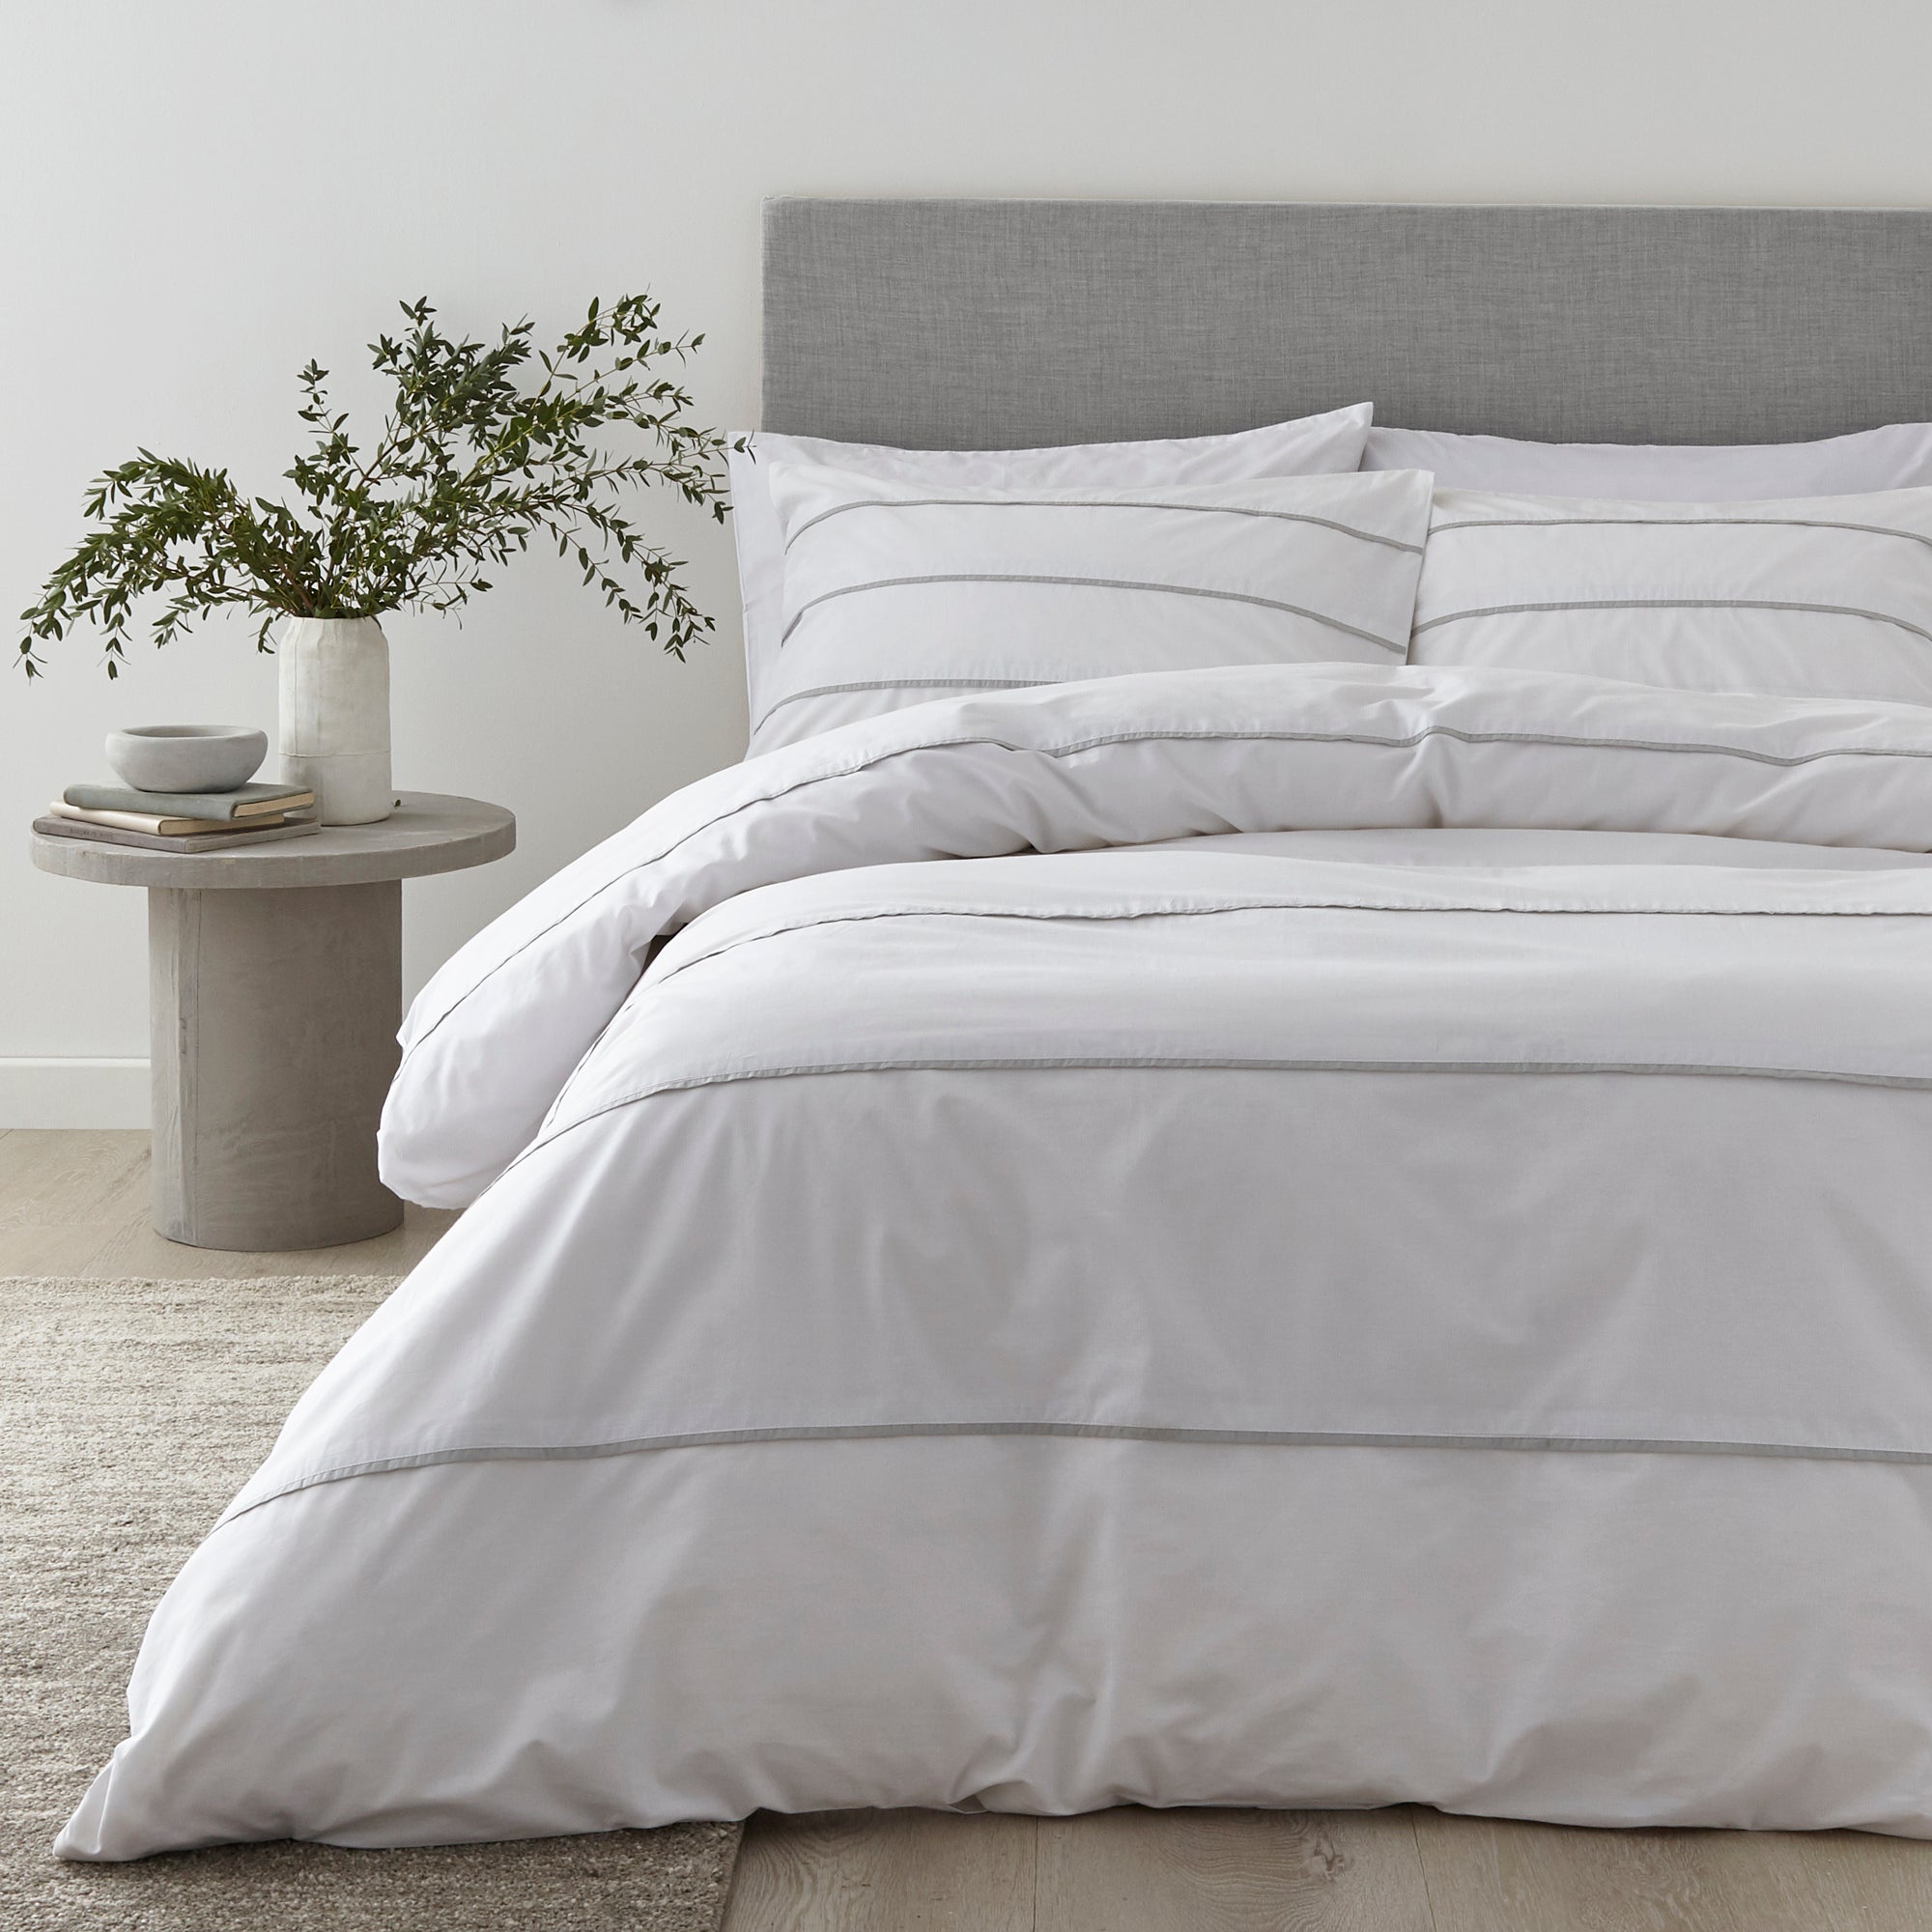 Content By Terence Conran Halstead Pleats White and Grey Striped 100% Cotton Duvet Cover and Pillowcase Set Grey